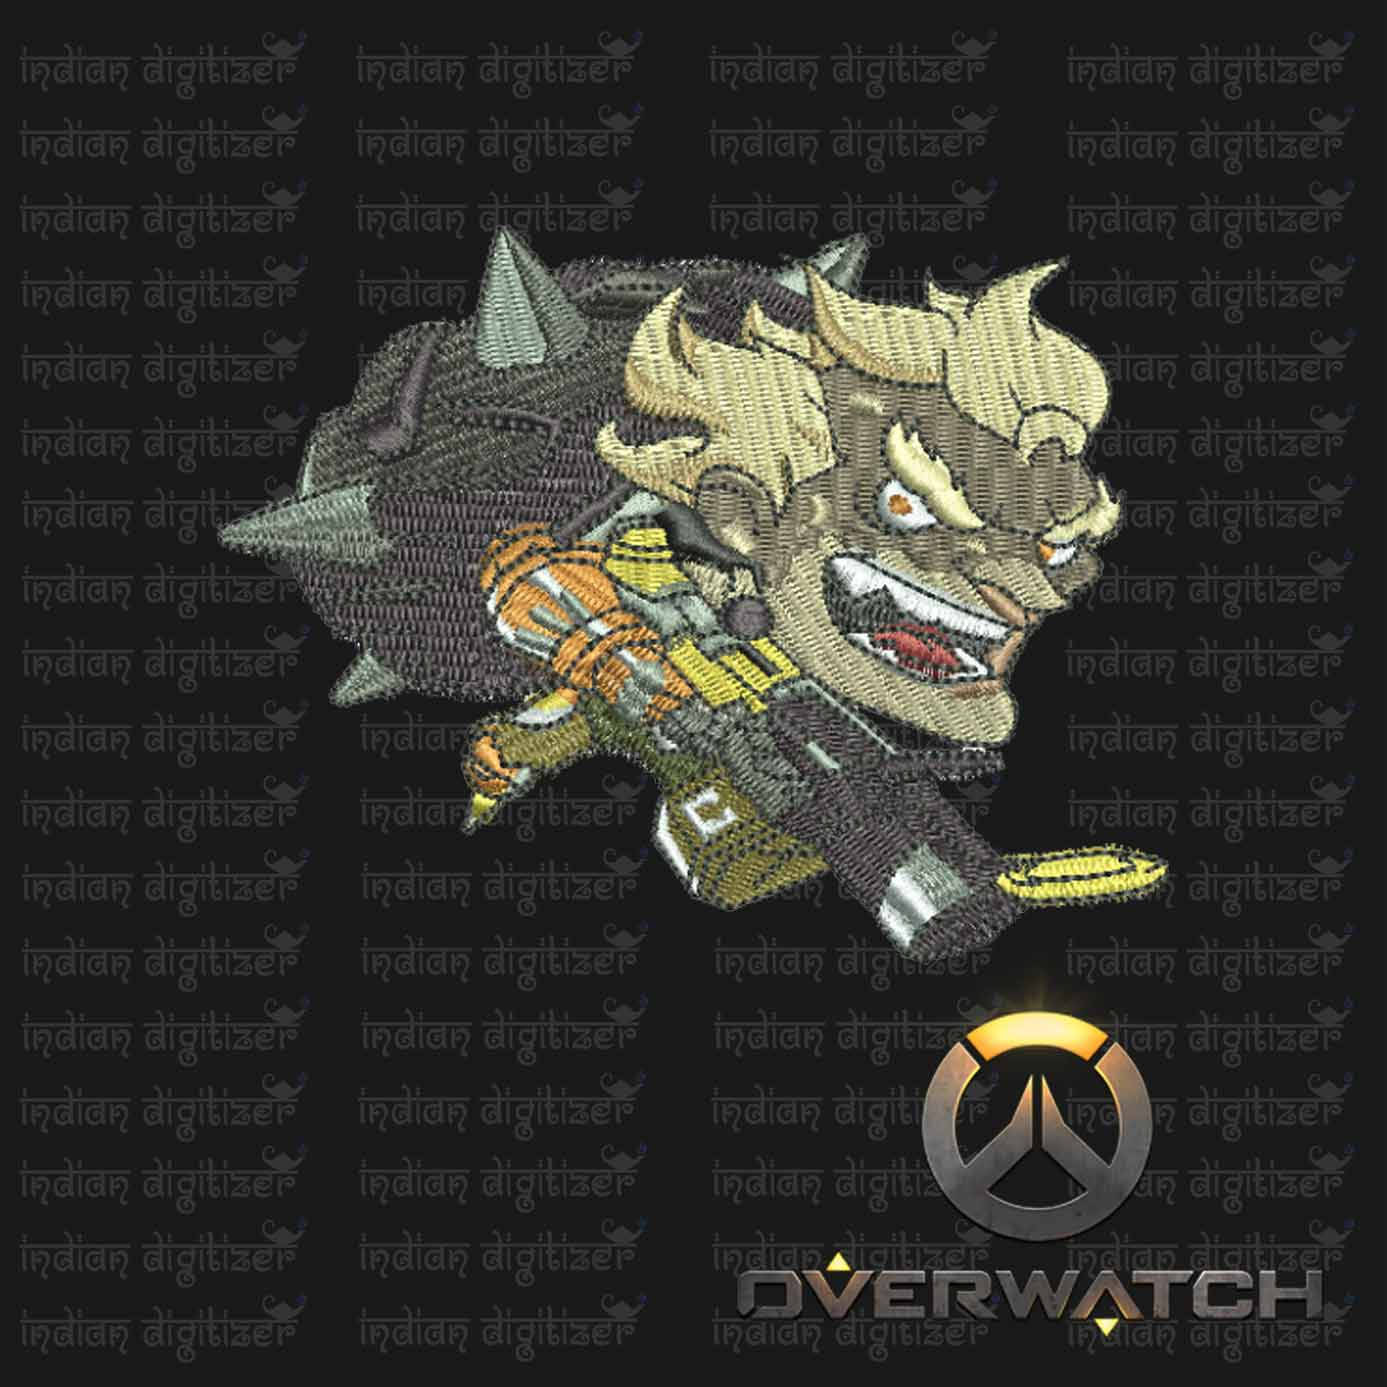 Overwatch Embroidery Designs - Junkrat individual character for 4x4in hoop - resizable with freely downloadable software.